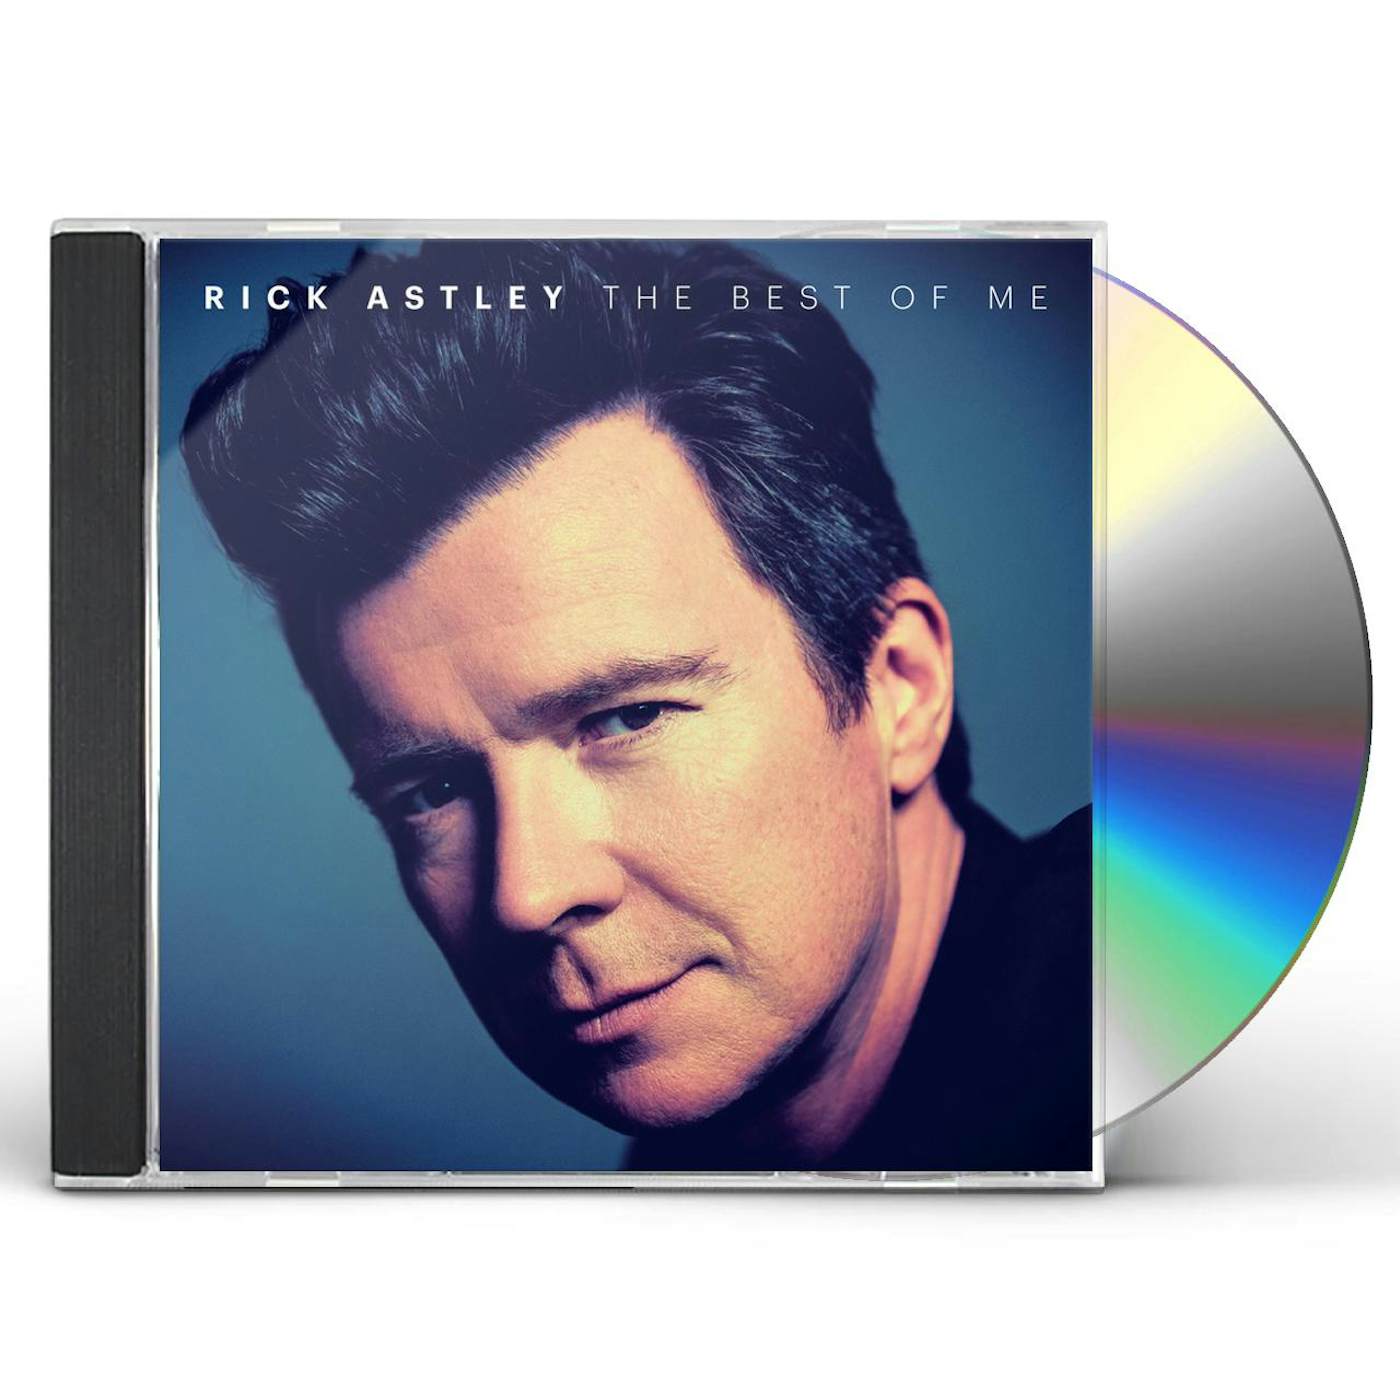 Rick Astley The Best of Me (Deluxe 2 Disc) CD